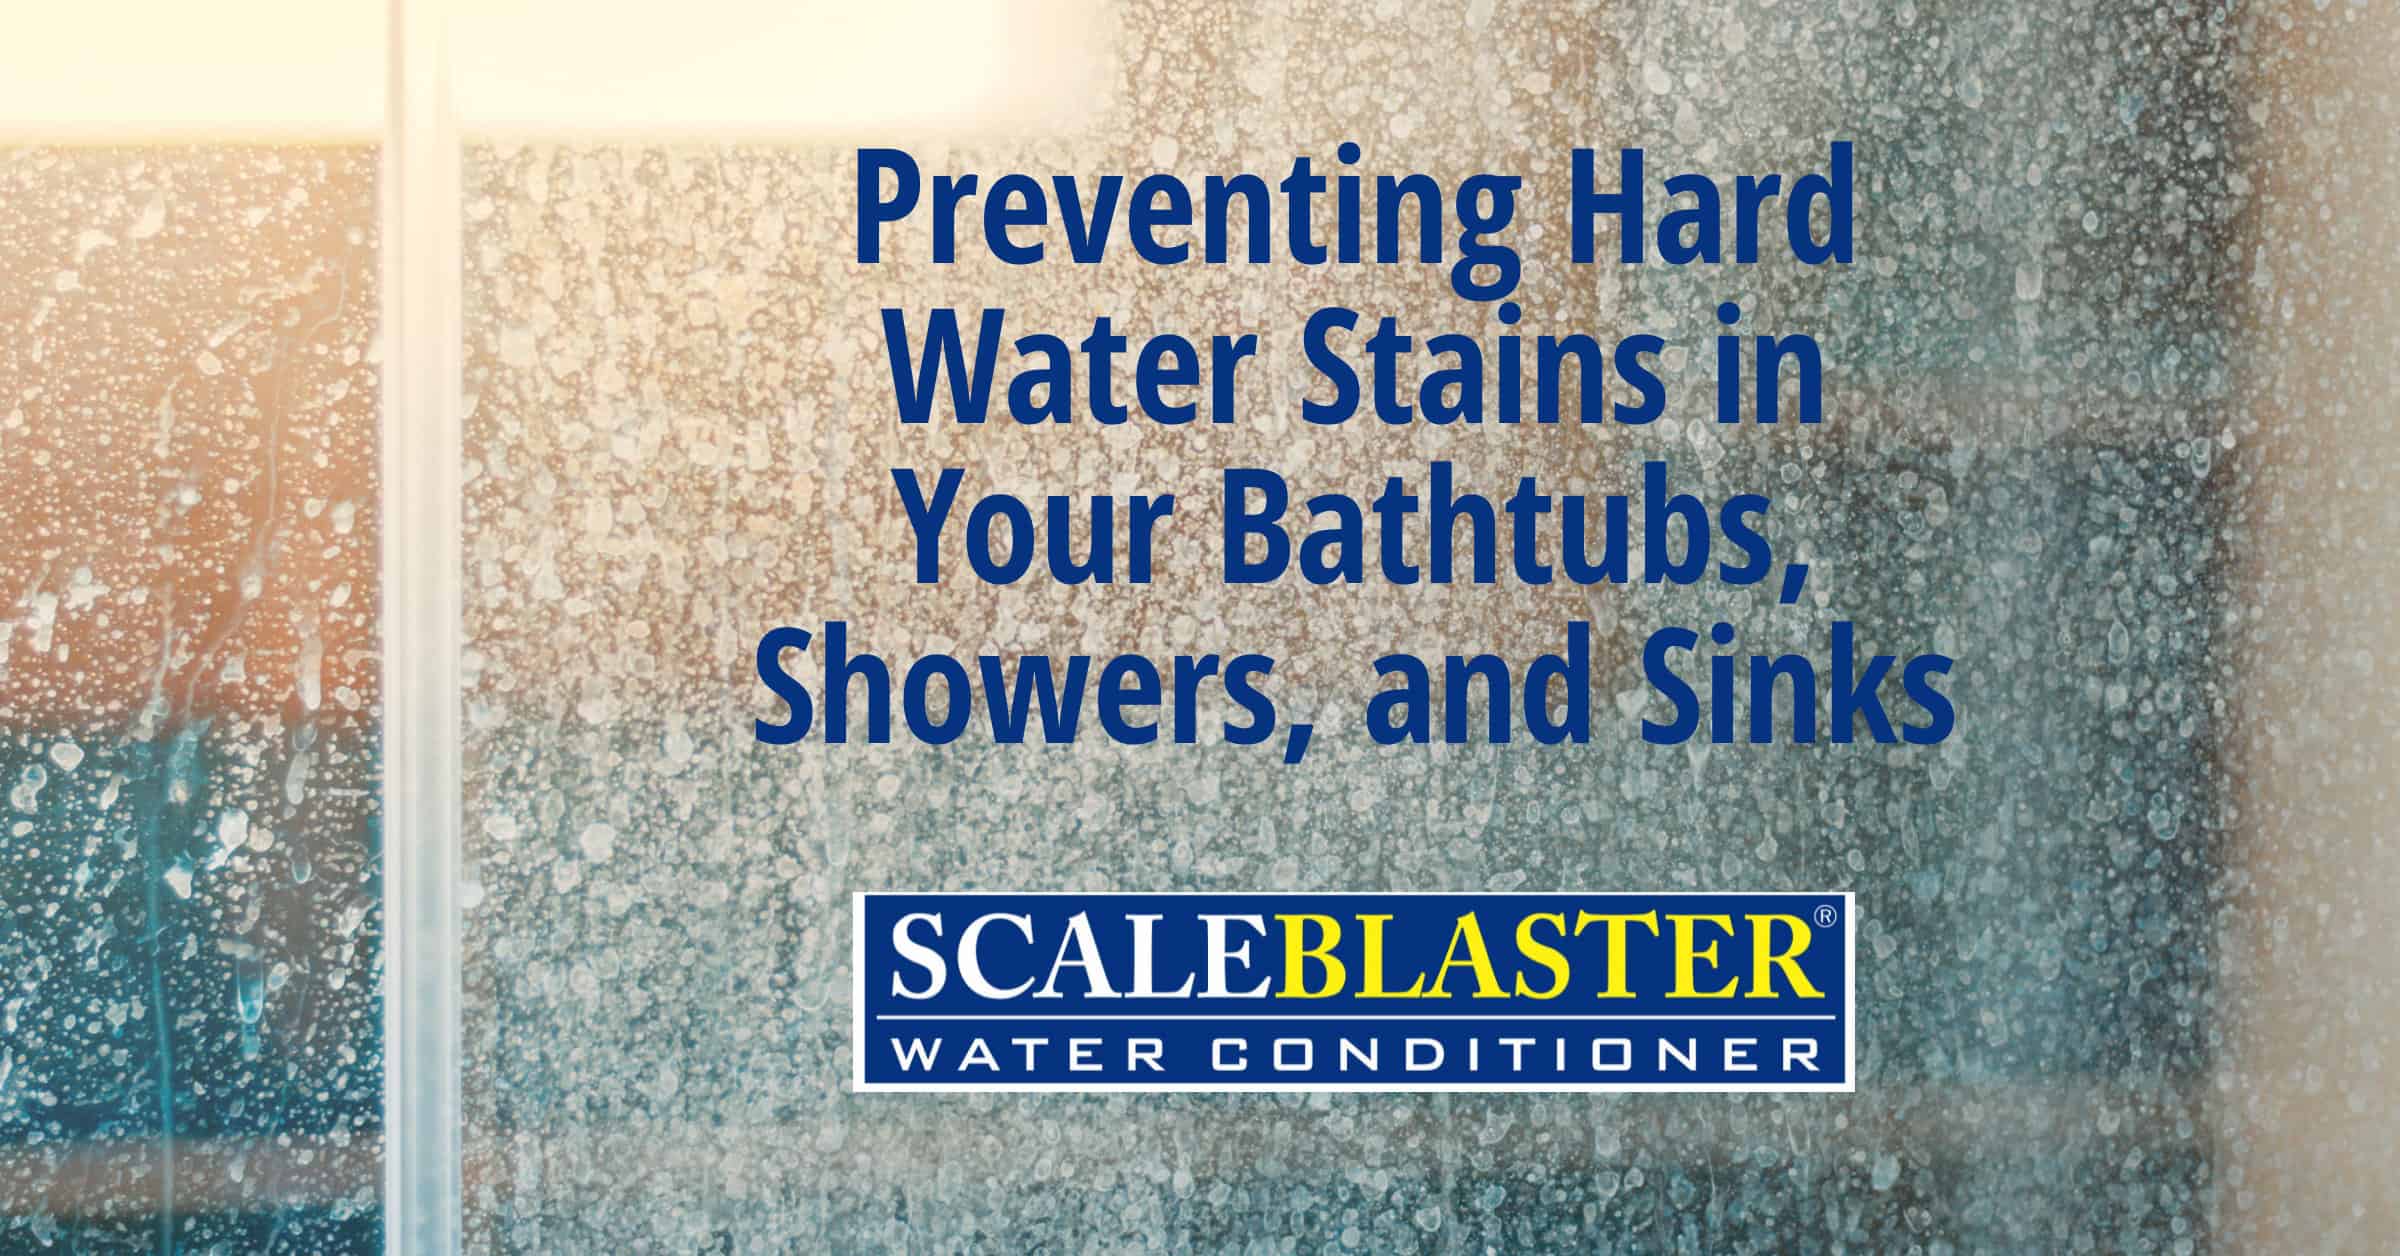 Preventing Hard Water Stains in Your Bathtubs Showers and Sinks 1 - Preventing Hard Water Stains in Your Bathtubs, Showers, and Sinks